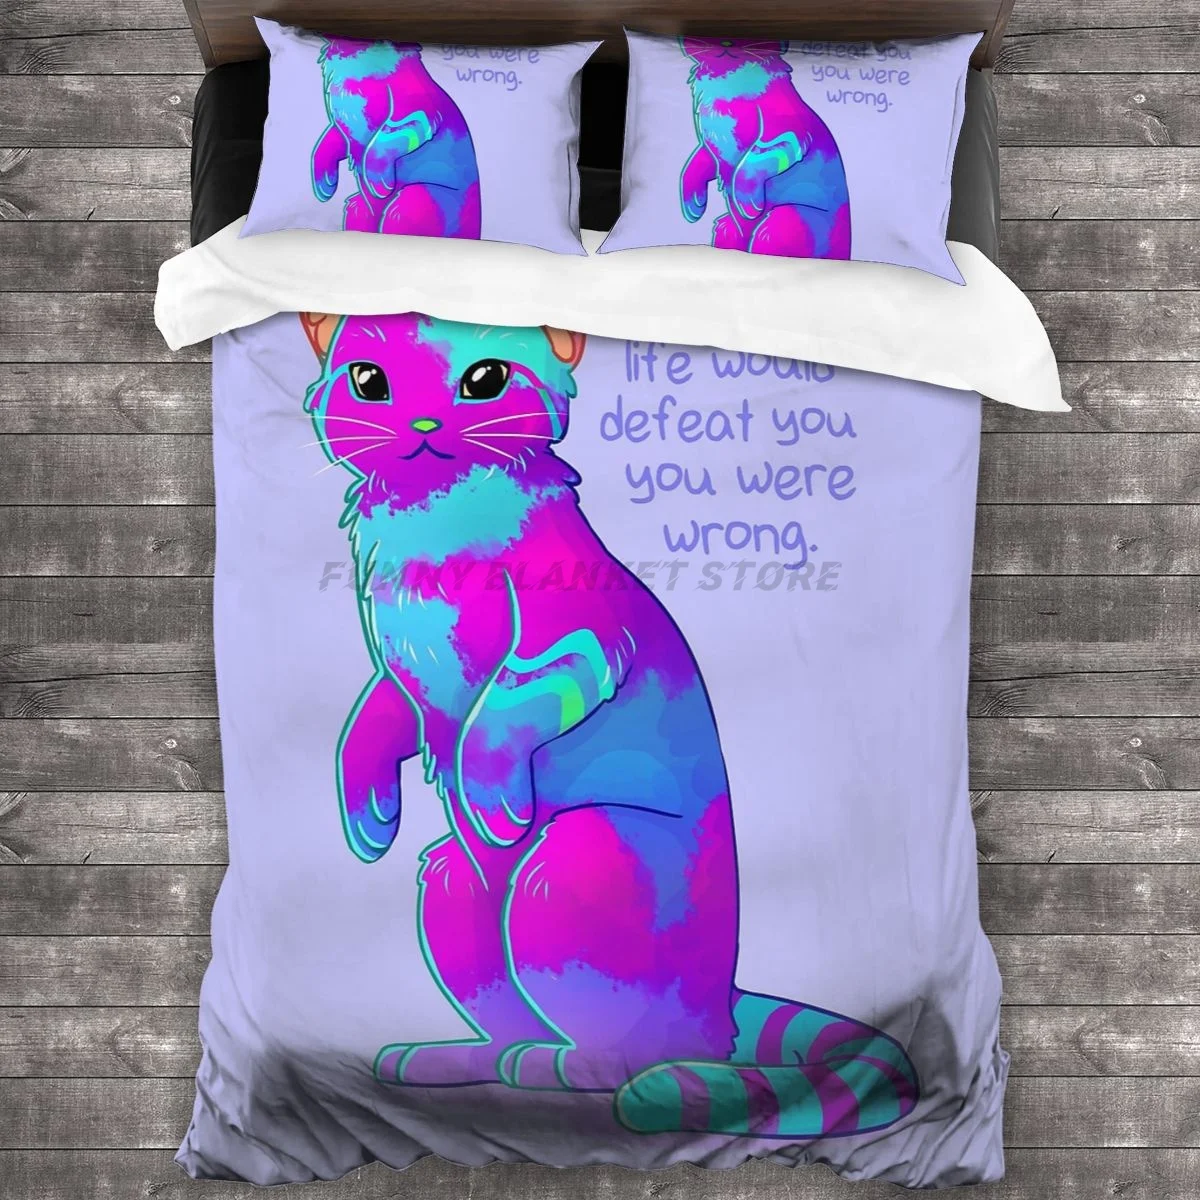 

Every Time You Thought Life Would Defeat You Rainbow Sky Sand Cat Bedding Set Duvet Cover Pillowcases Comforter Bedding Sets